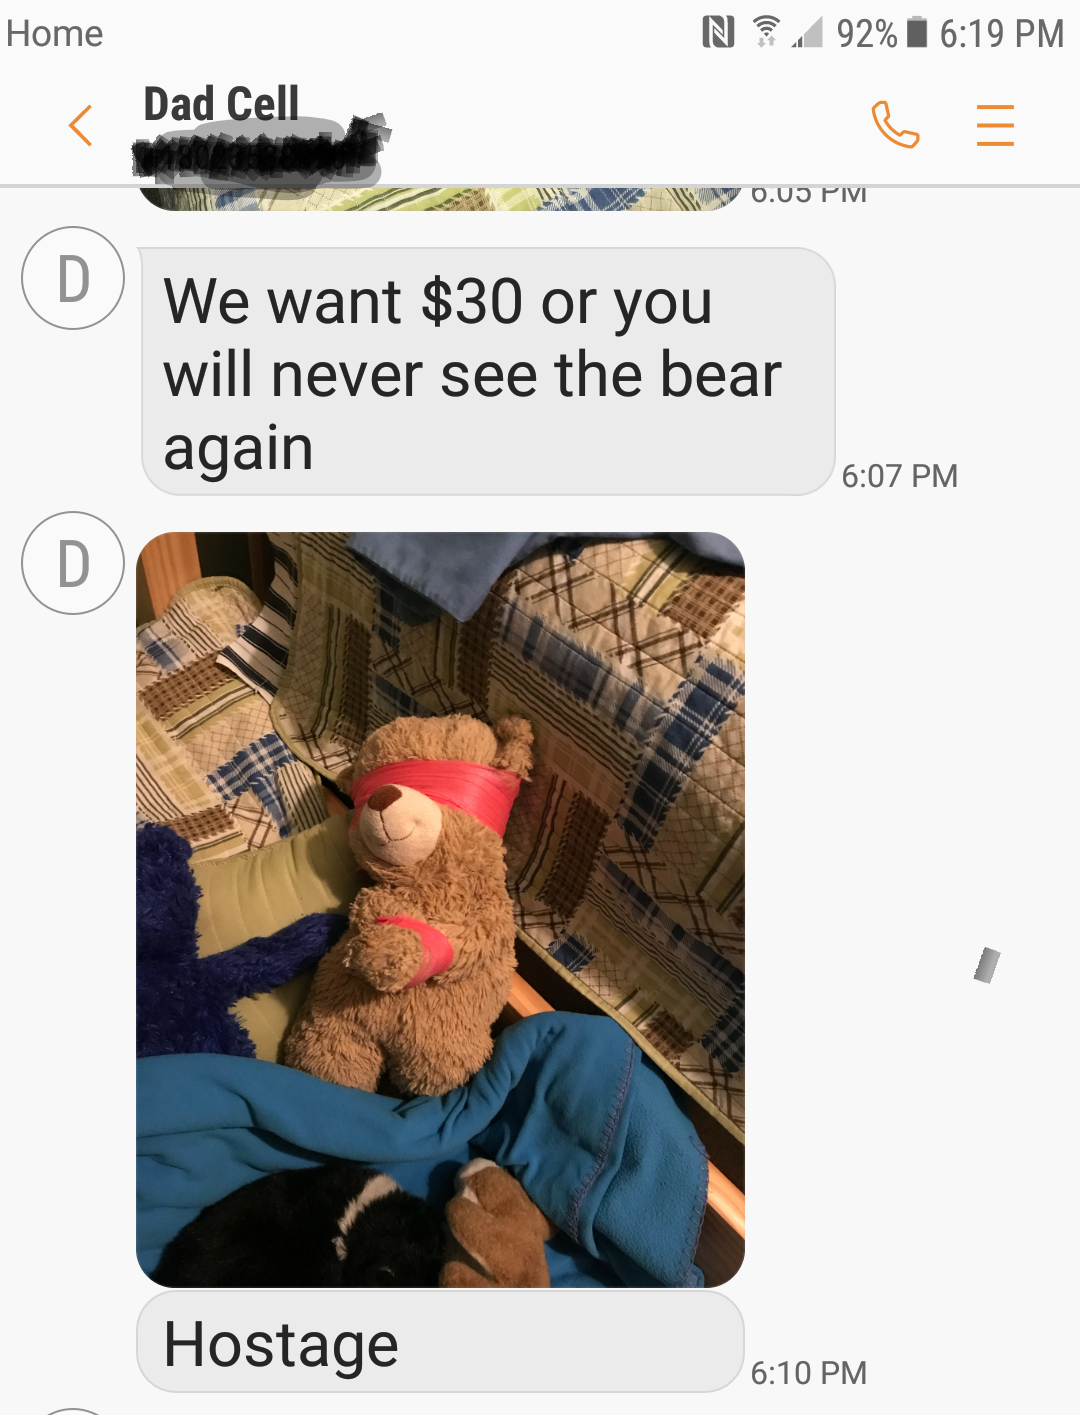 My 8 year old couldn't find his beloved teddy bear; turns out he accidentally left him at my Dad's house. This is the text my Dad sent to let us know he found the bear......